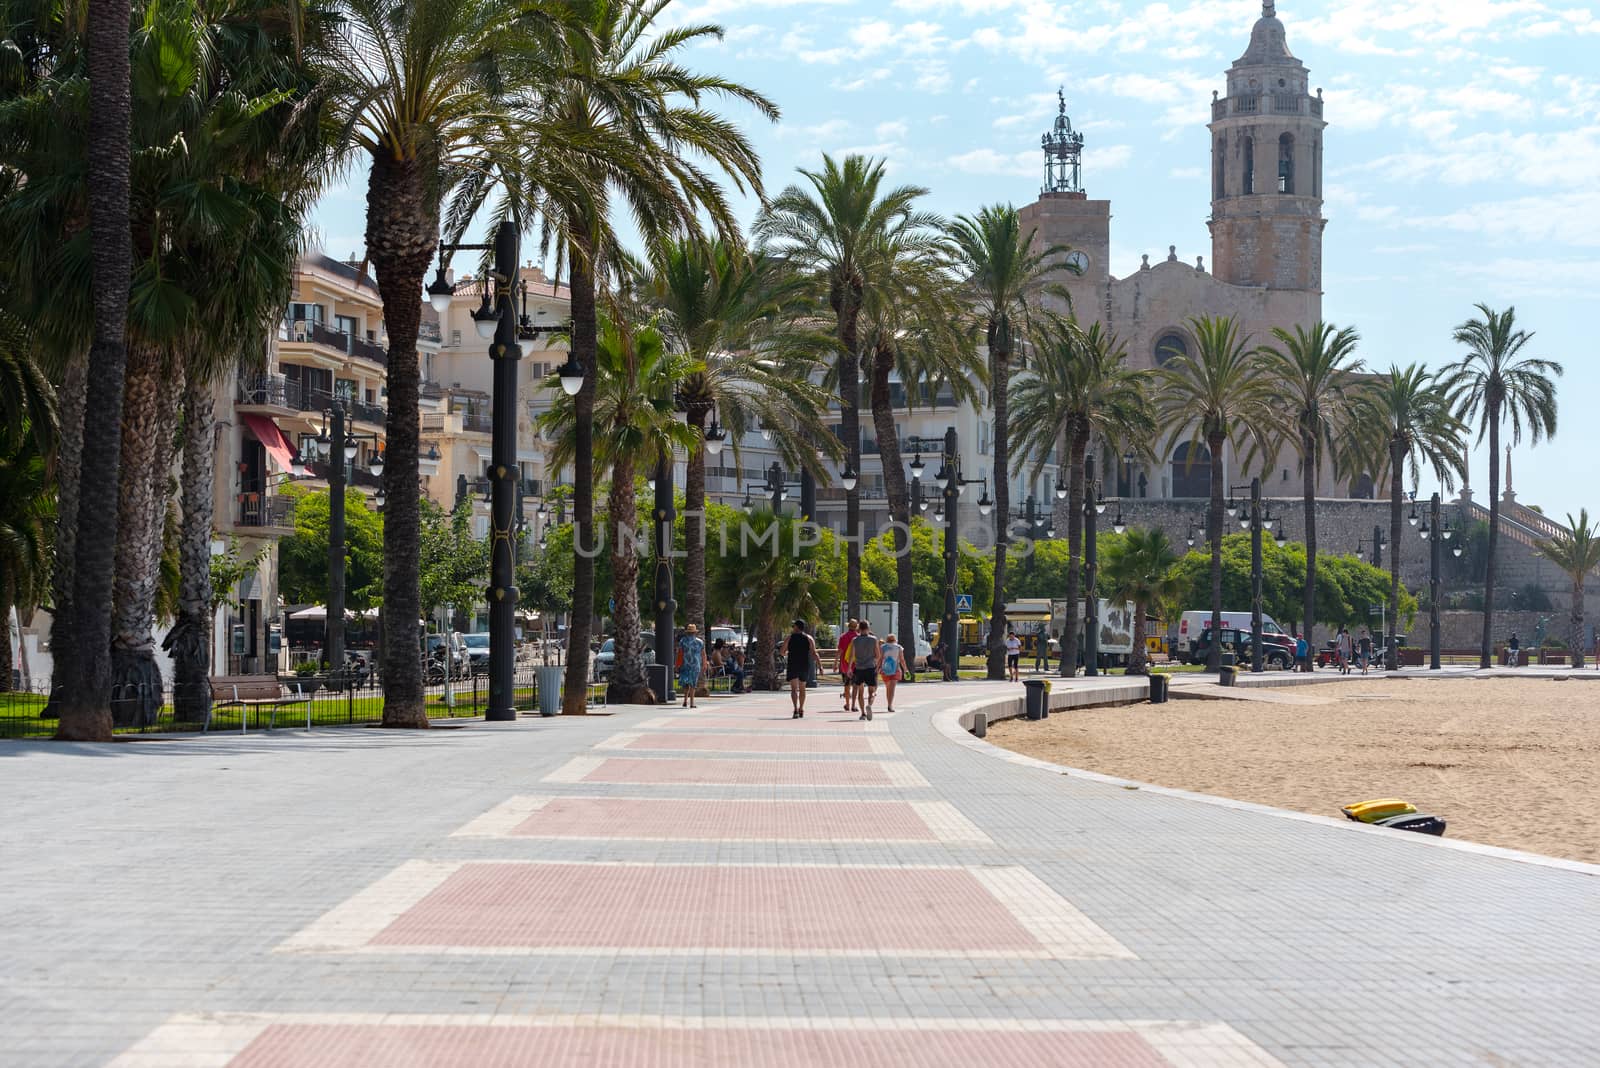 People on the Paseo Maritimo in the city of Sitges in the summer by martinscphoto